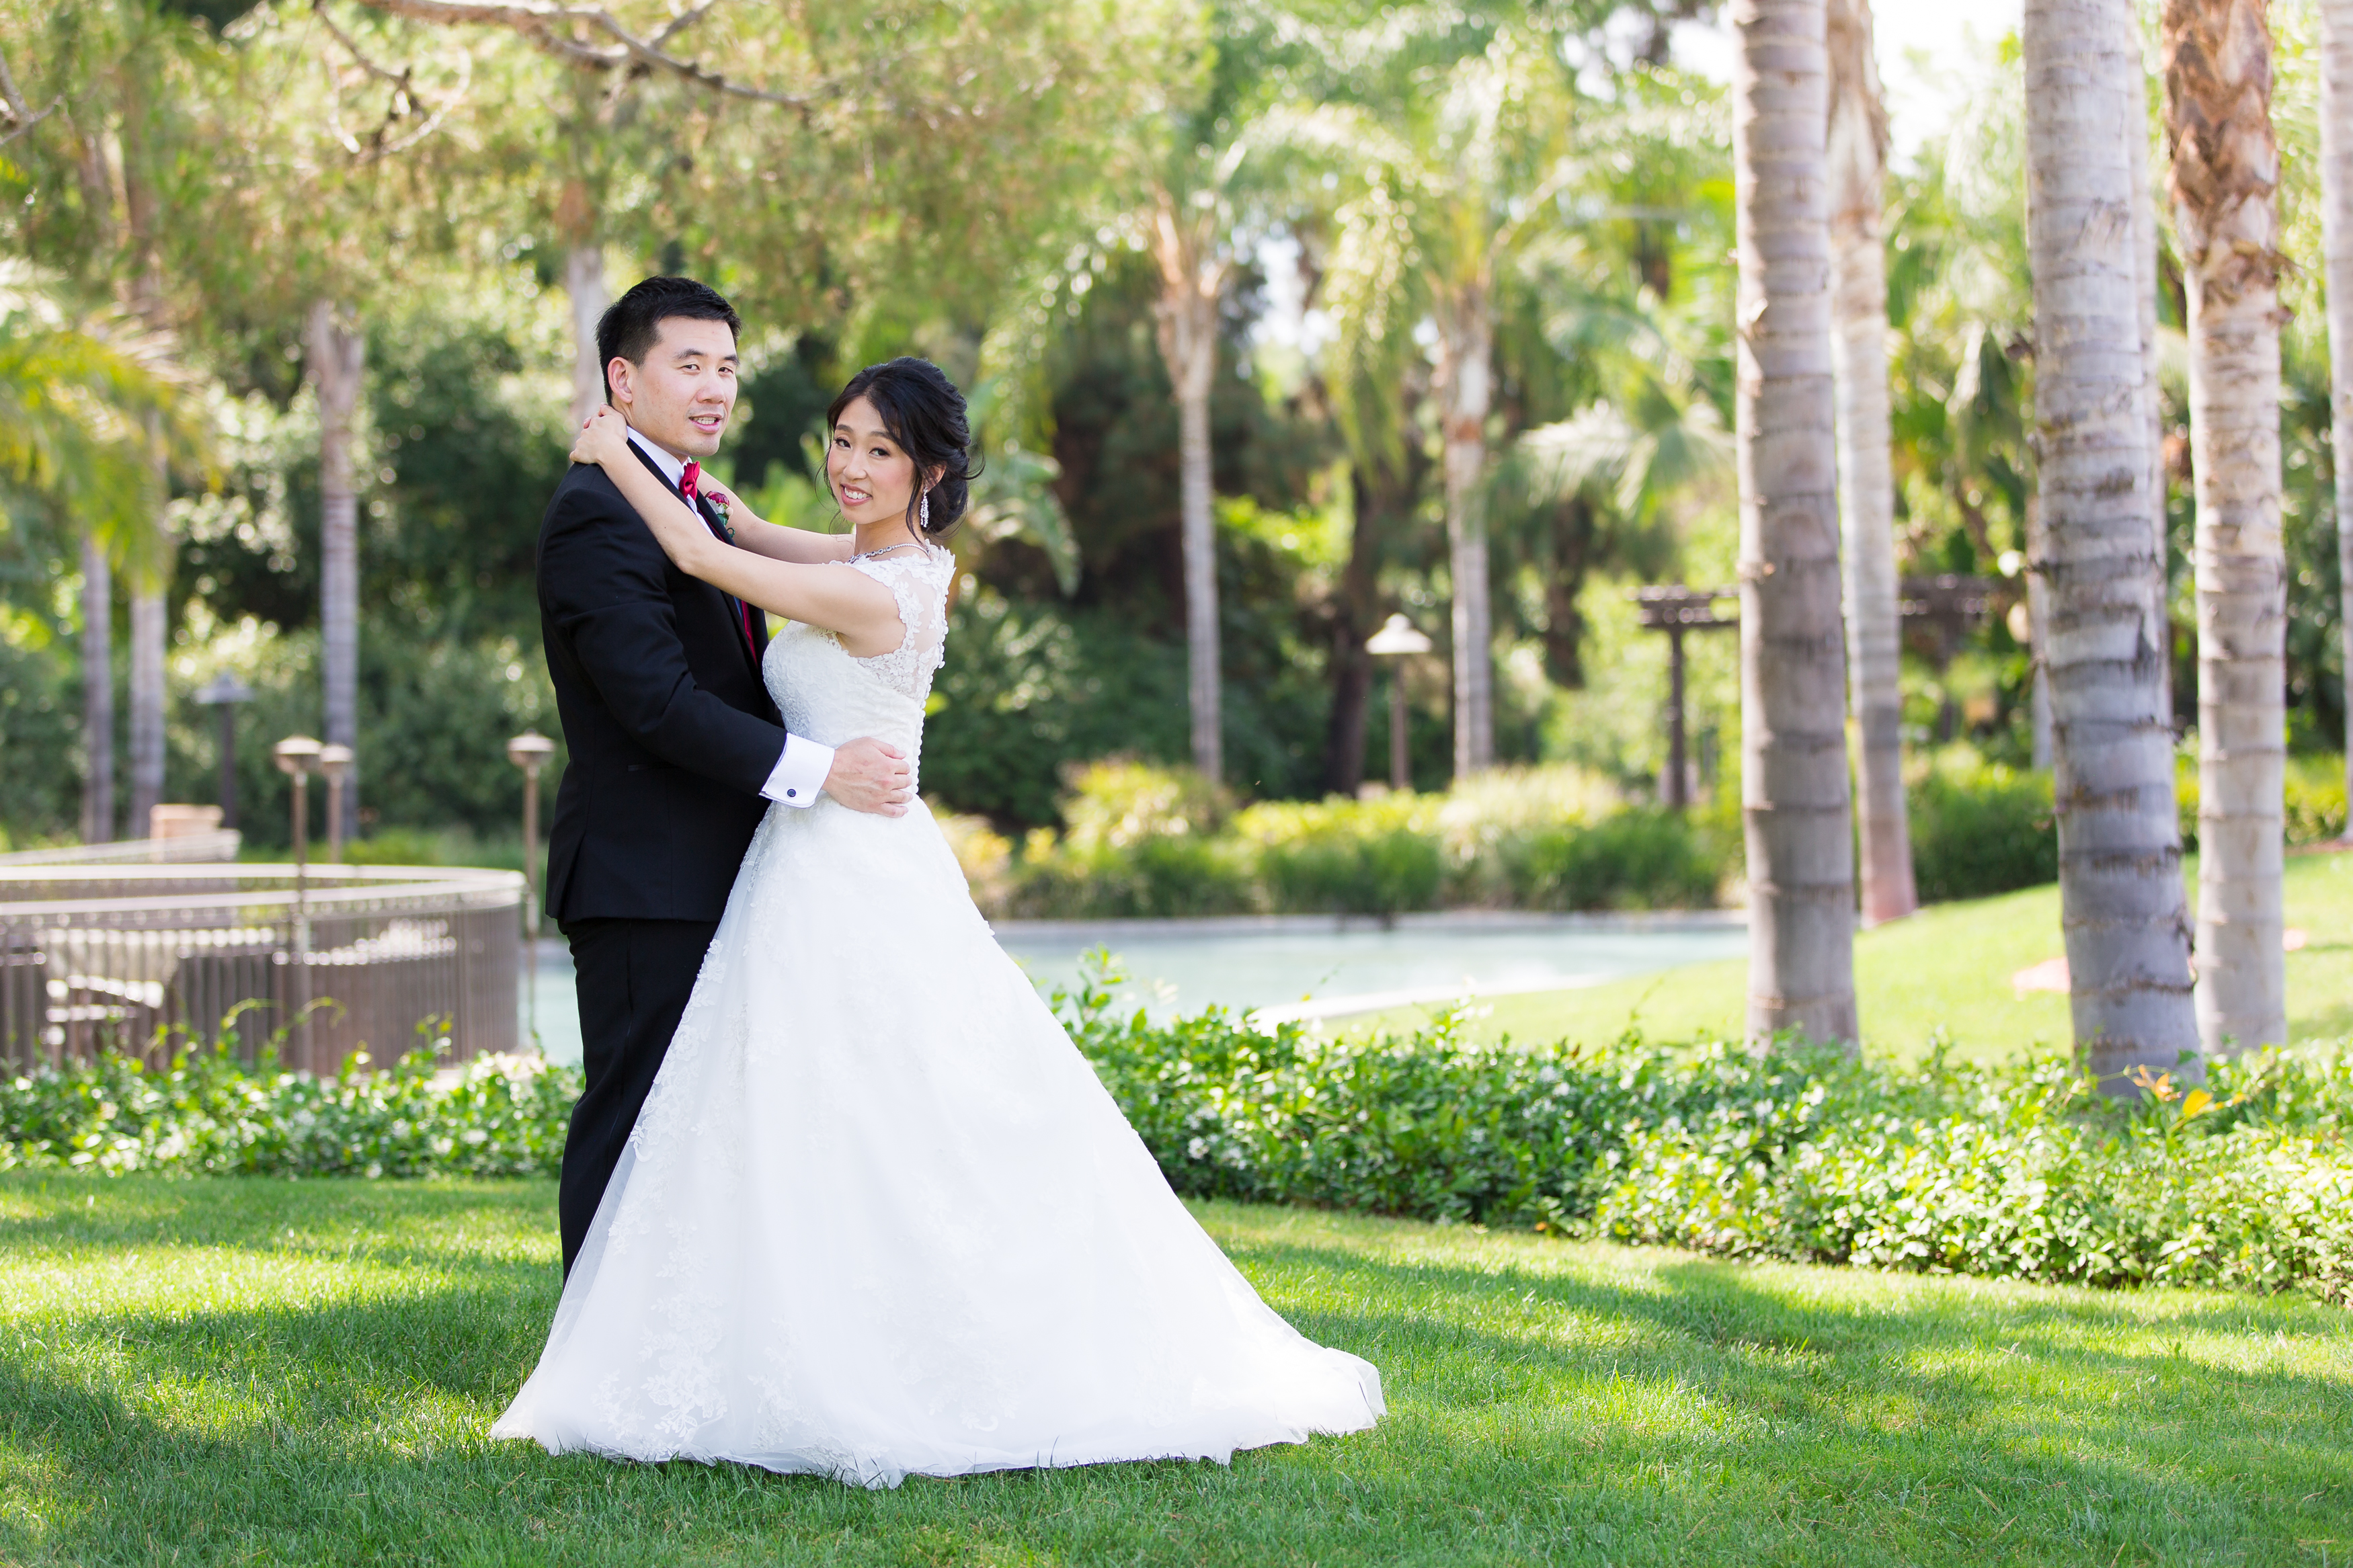 Bride and groom hugging in grass surrounded by palm trees